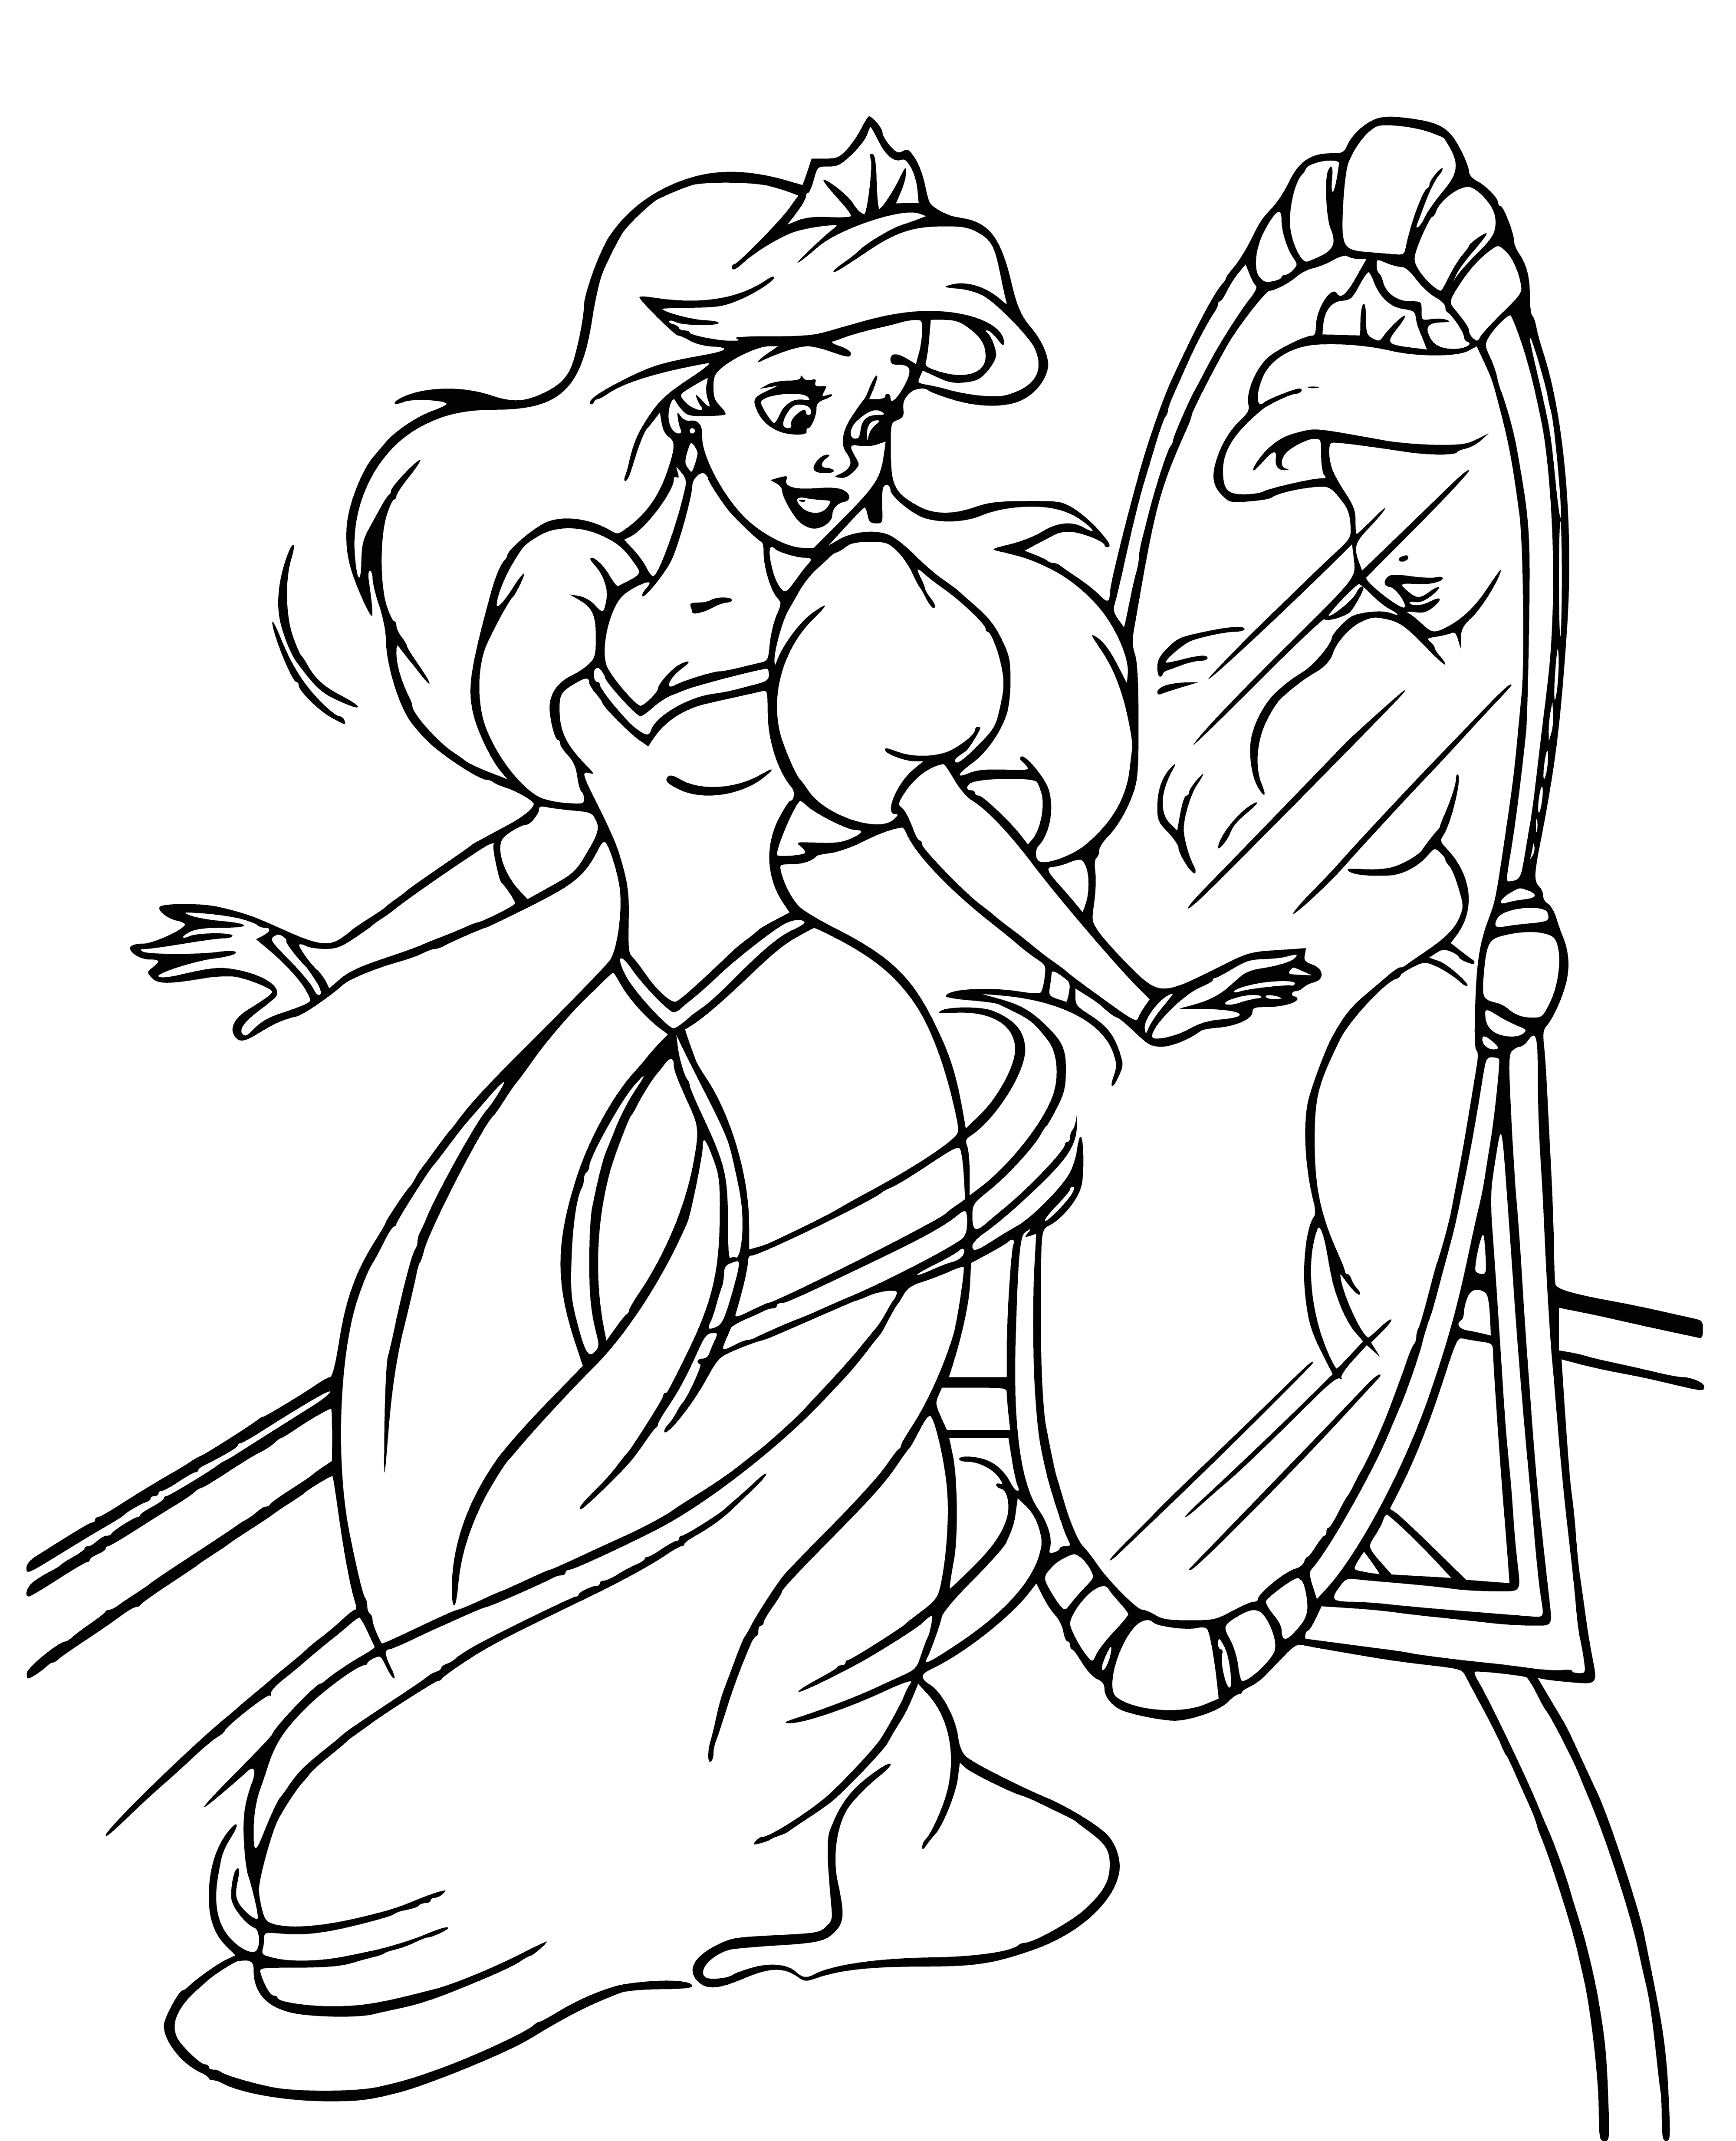 coloring page: Amermaid with bright red hair and a blue tail admires her looks in the mirror while holding a comb. Pink shell bikini top complete the look.